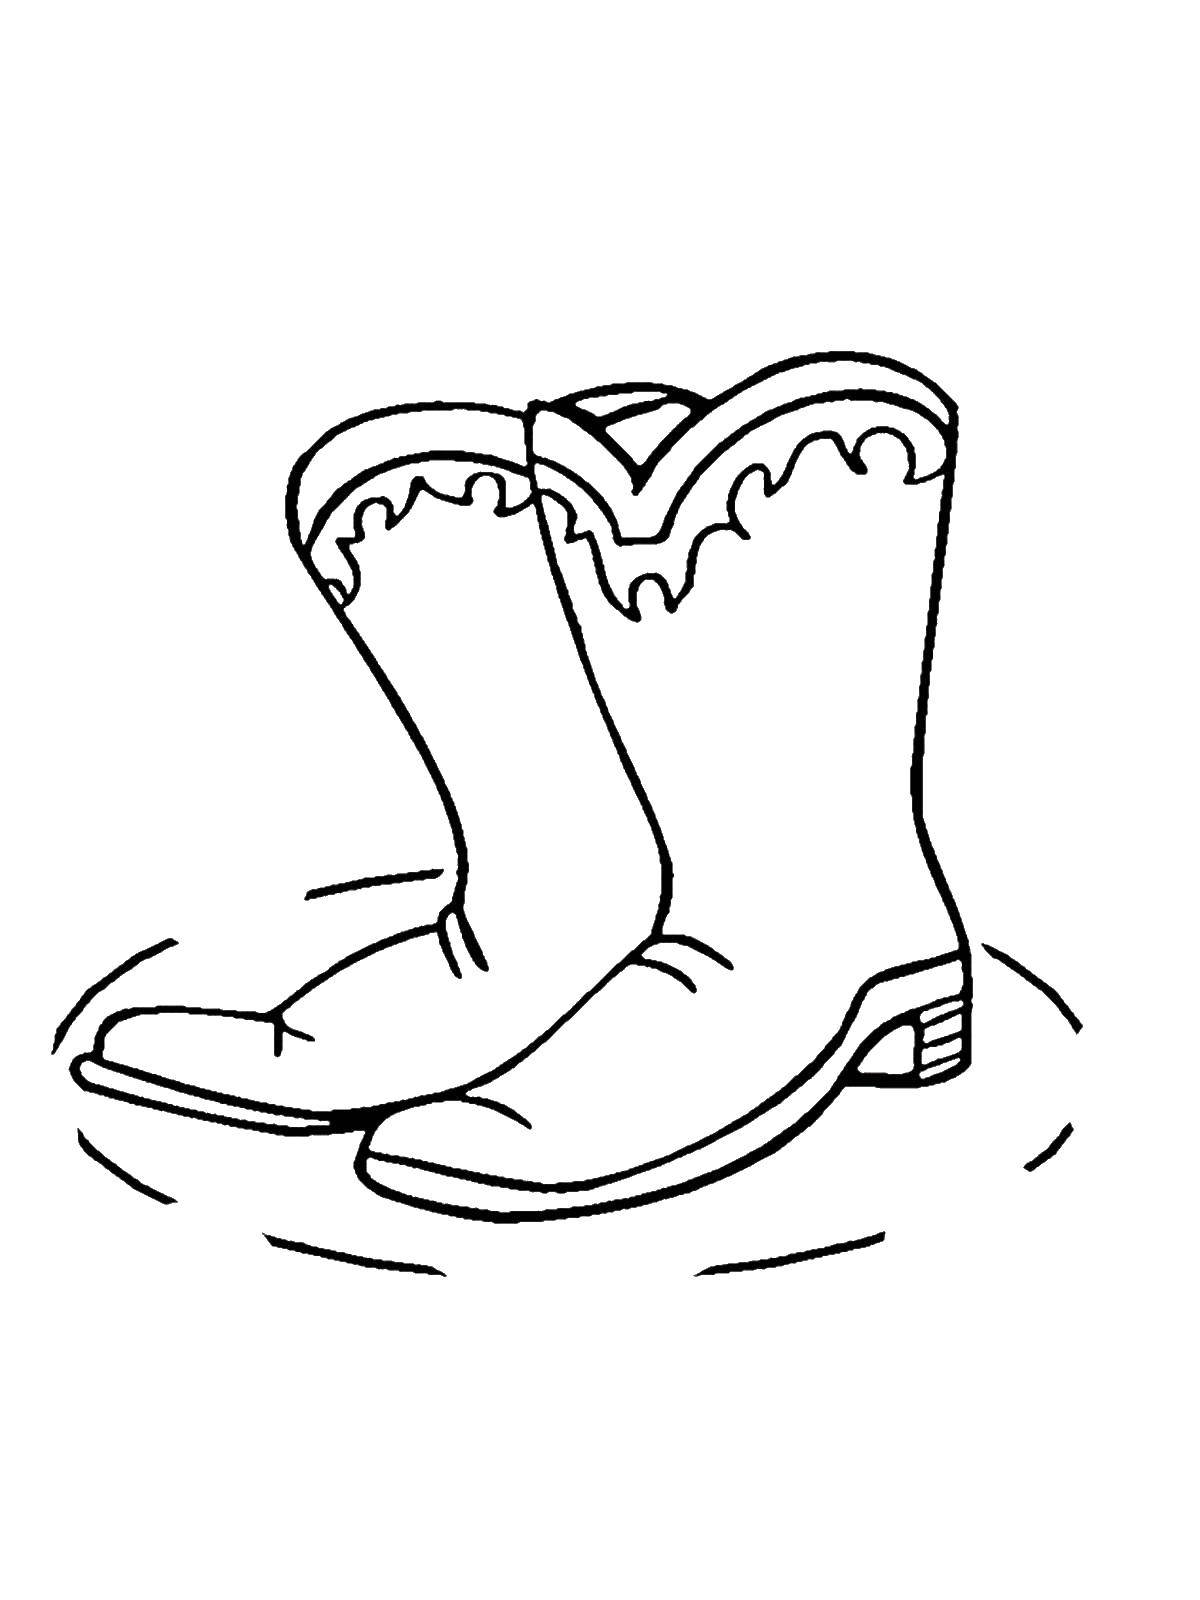 Coloring Boots. Category clothing. Tags:  Boots.